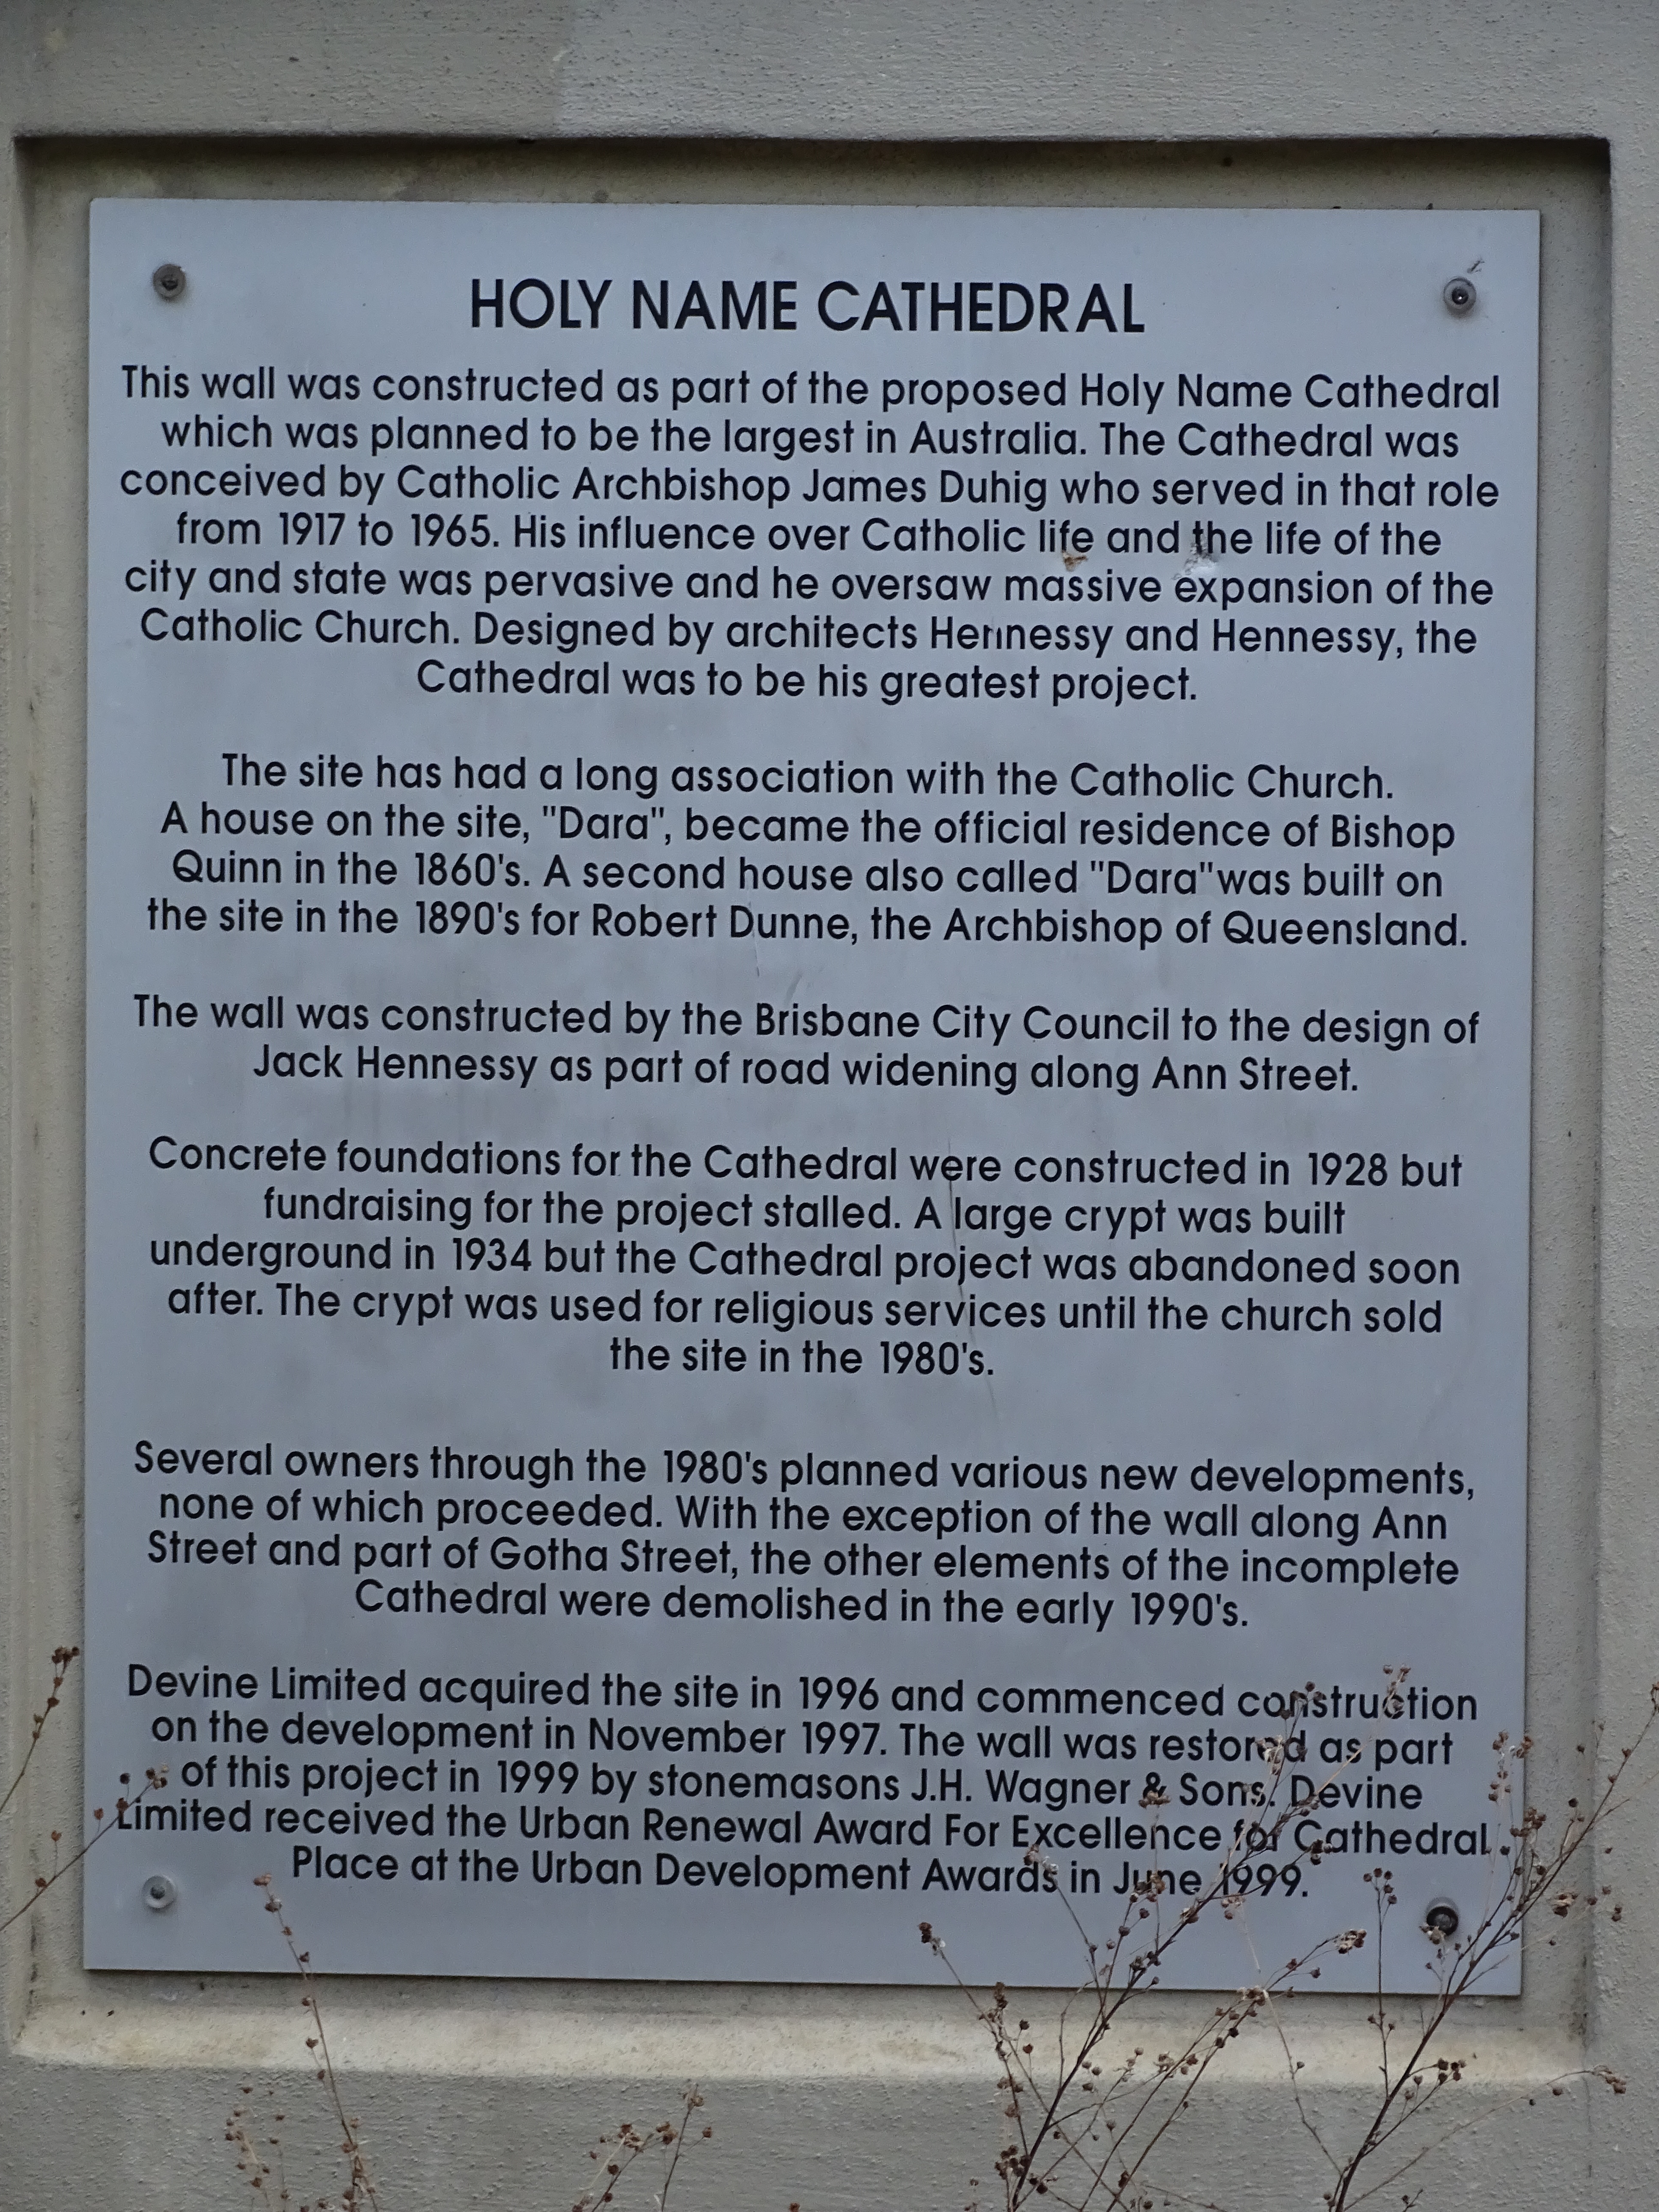 This is an image showing a plaque on the Heritage Place known as the Holy Name Cathedral site, viewed from Gotha Street.